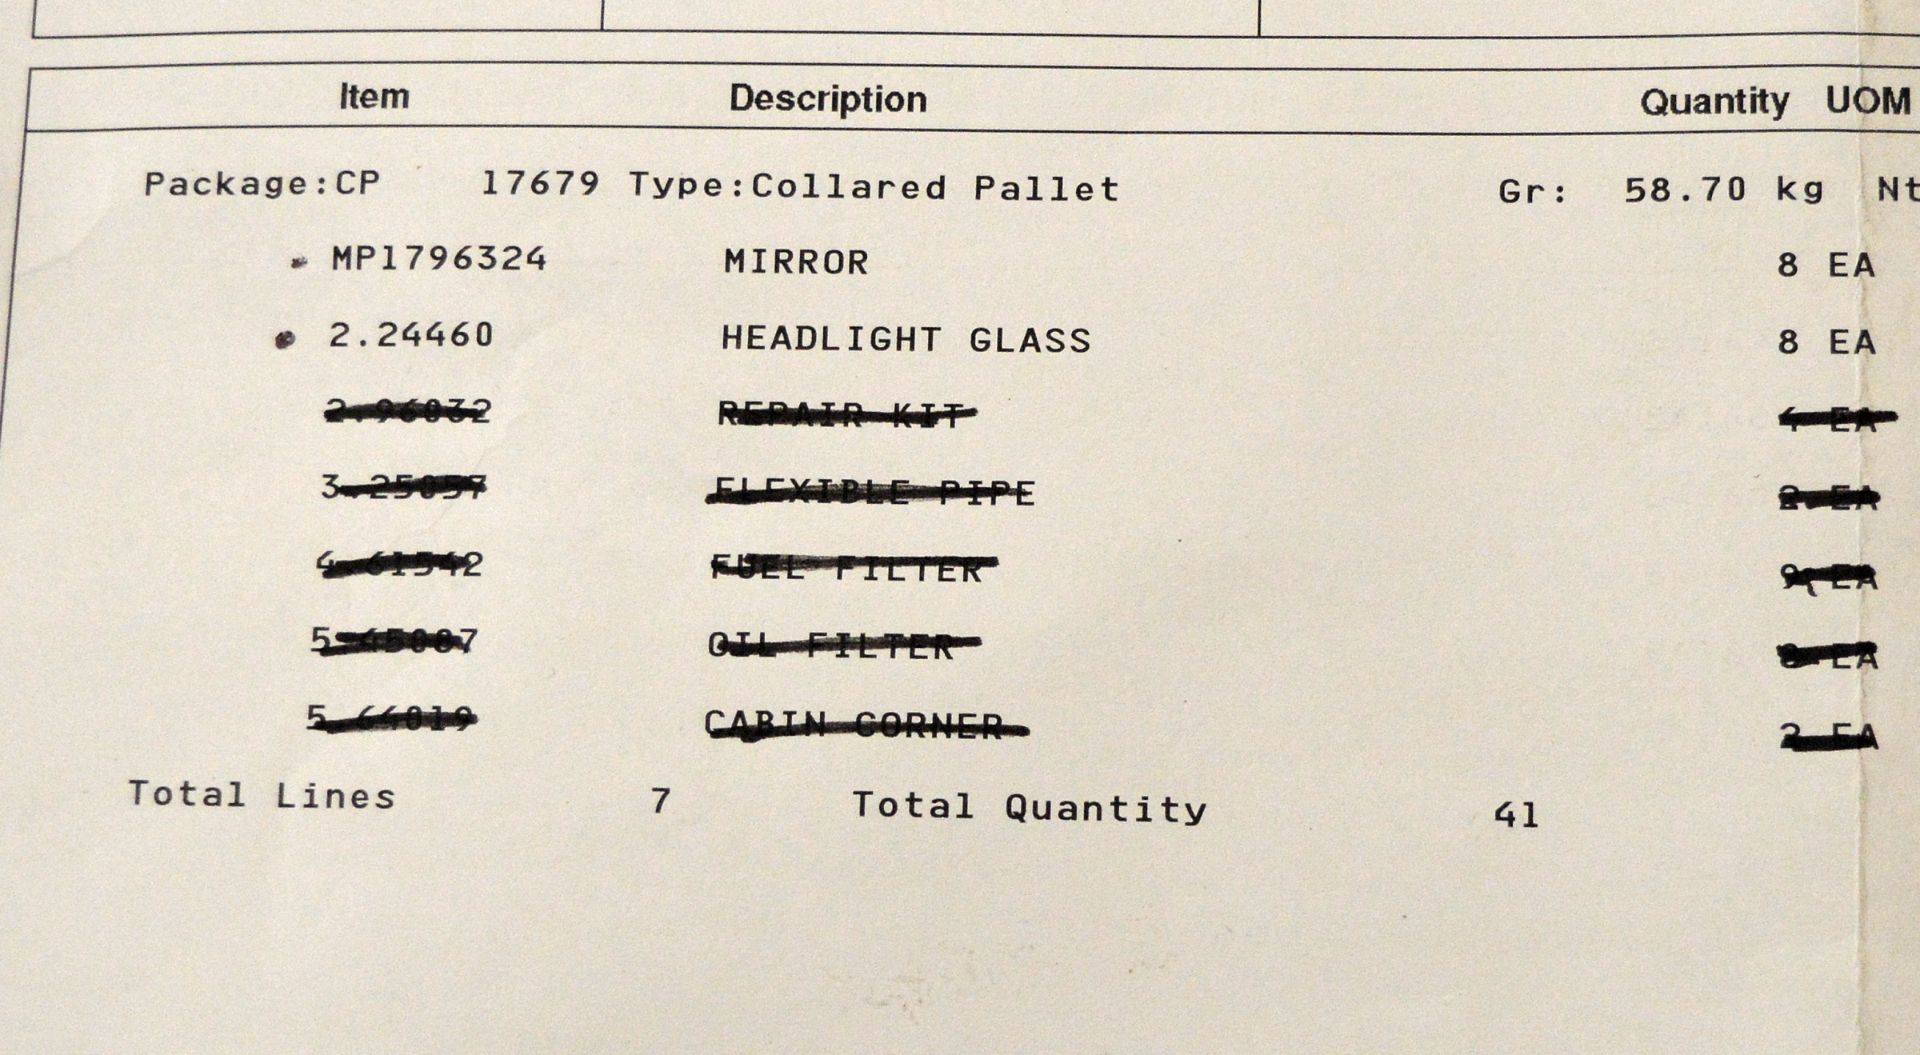 Vehicle parts - mirrors, head light glass - see picture for itinerary for model numbers - Image 6 of 6